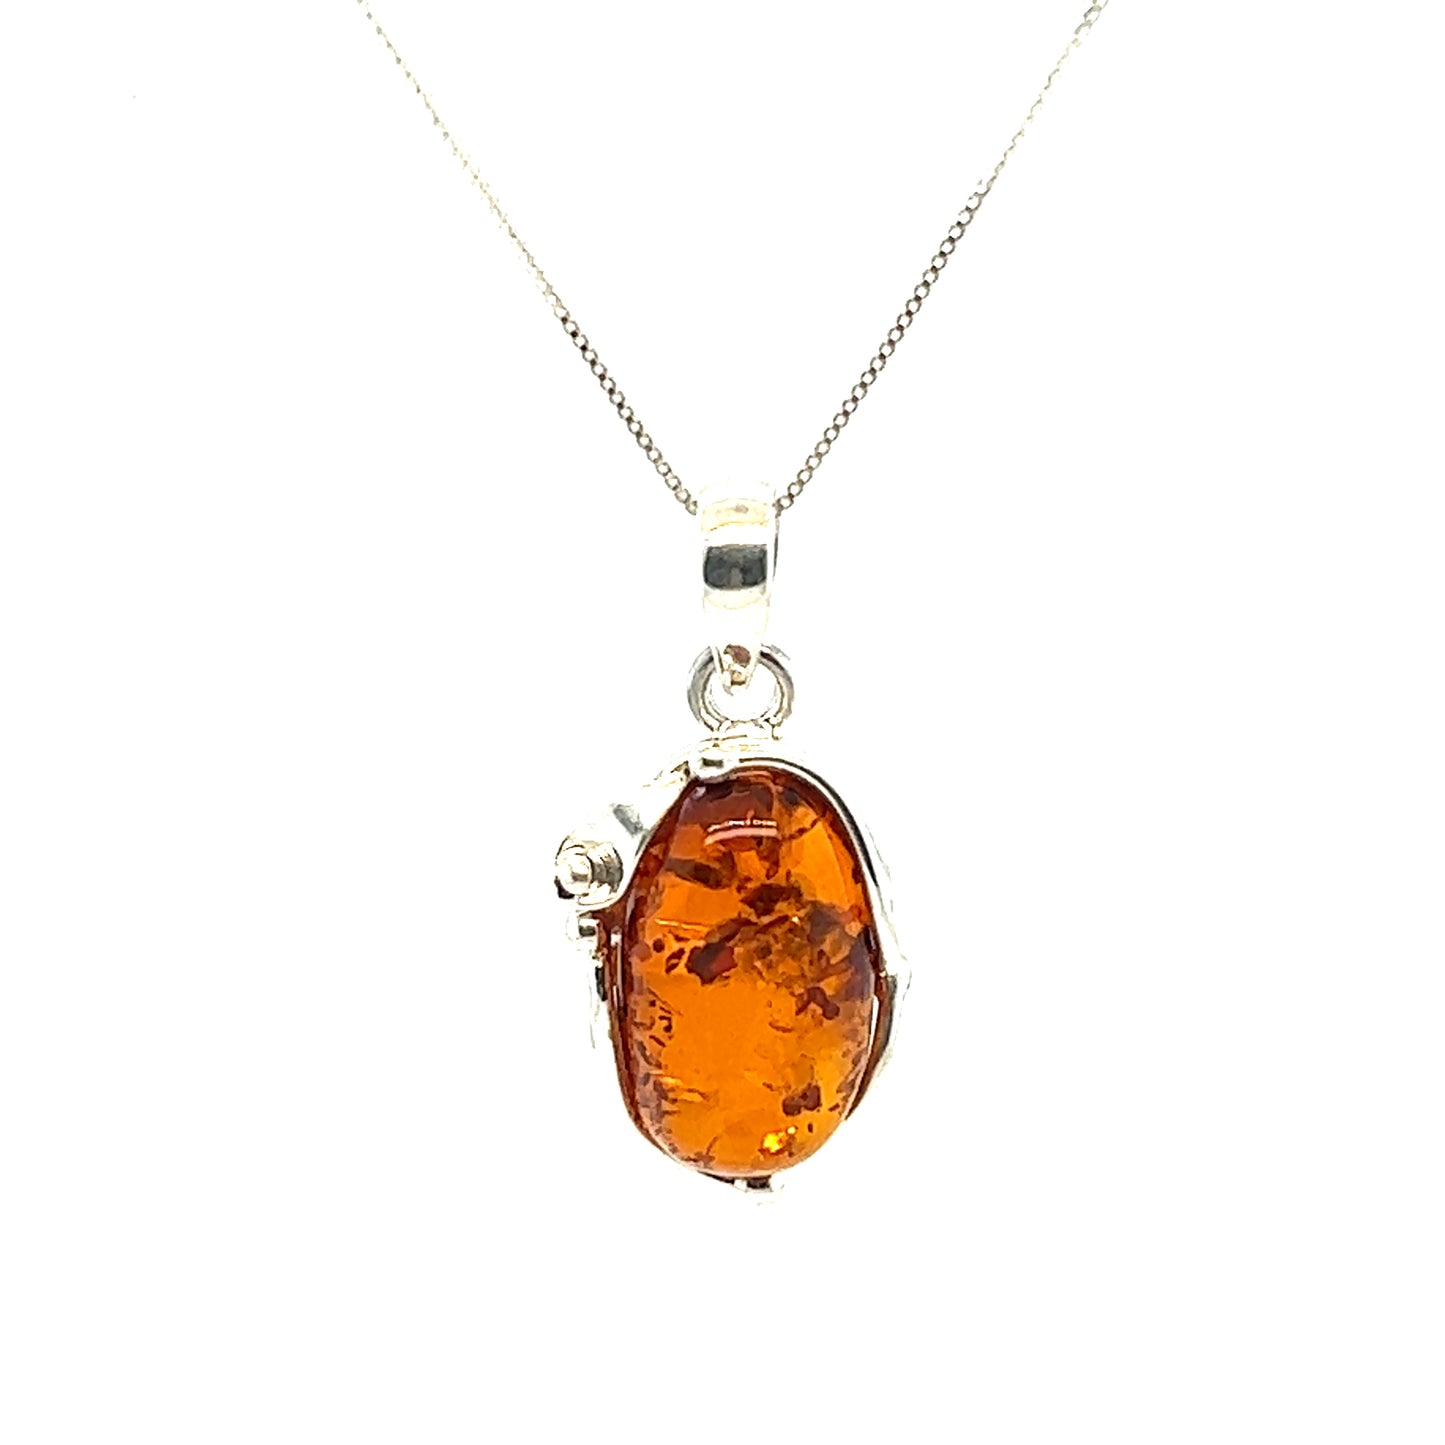 Vintage-inspired Super Silver Stunning Amber Oval Pendant adorned with silver vines in sterling silver.